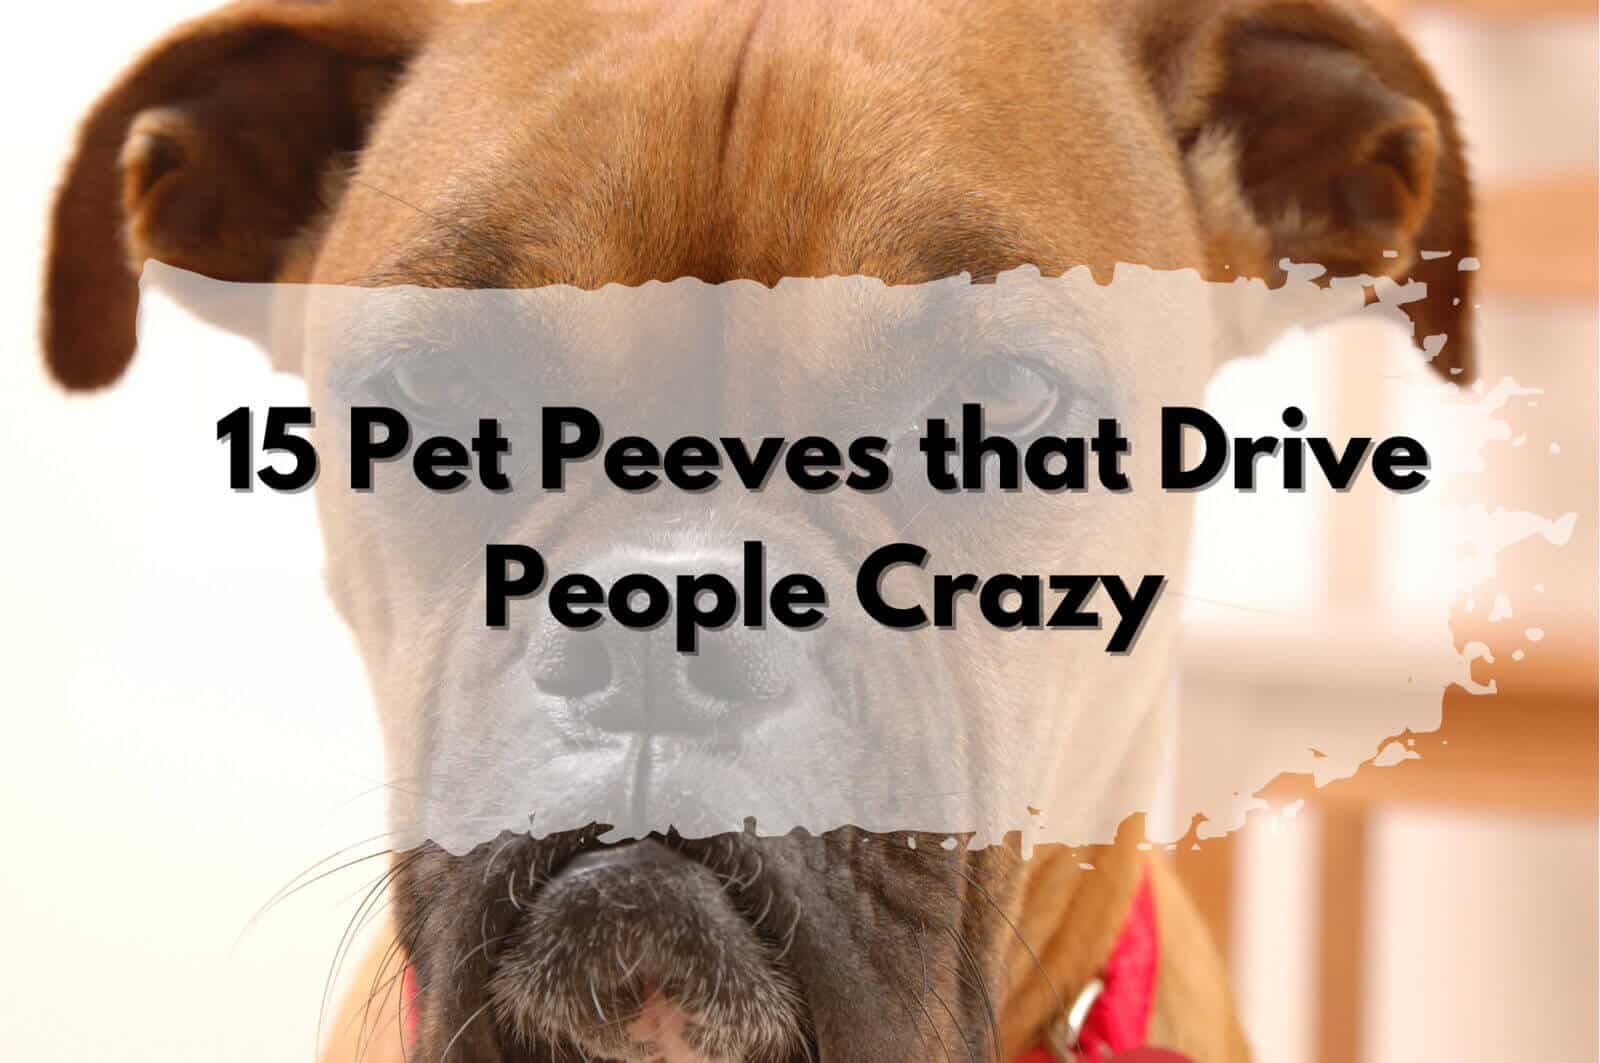 List of 15 pet peeves that annoy individuals.